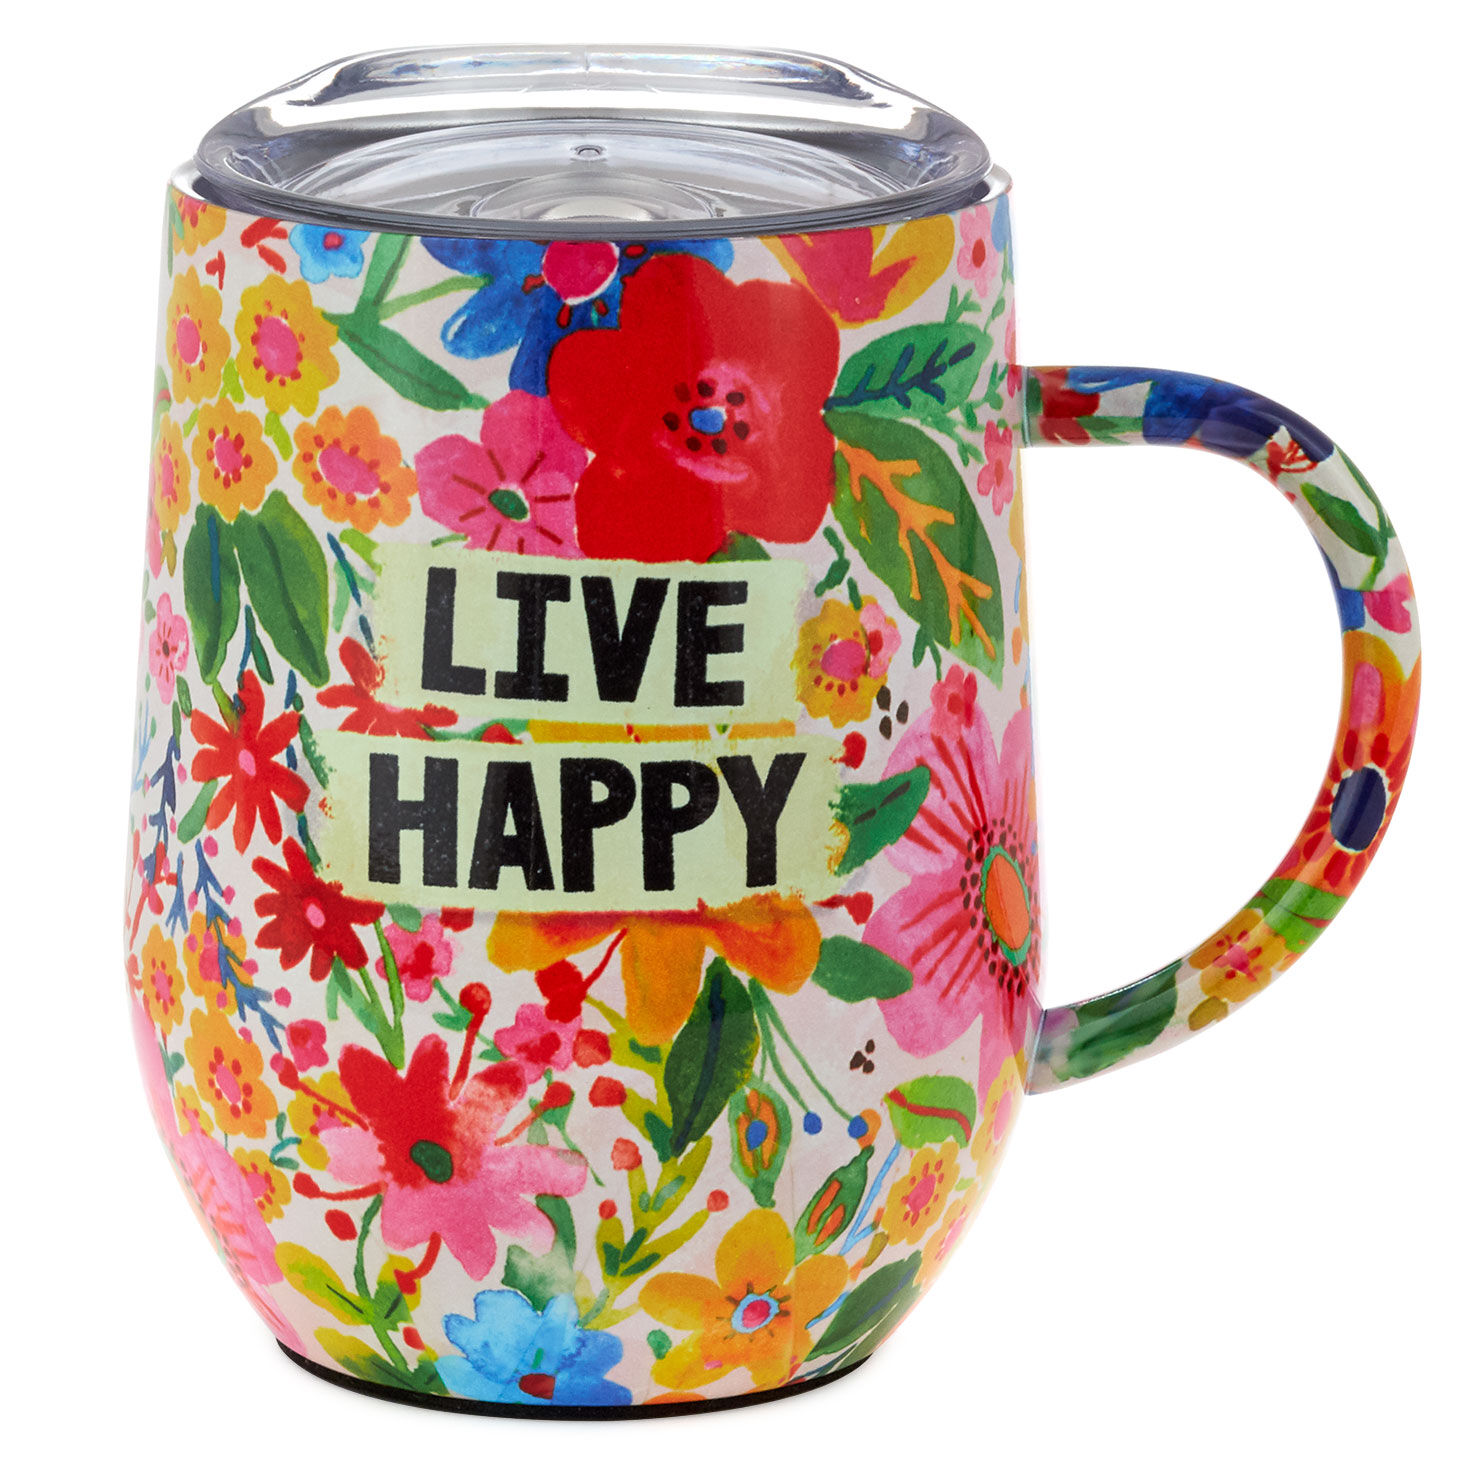 https://www.hallmark.com/dw/image/v2/AALB_PRD/on/demandware.static/-/Sites-hallmark-master/default/dw27a827bb/images/finished-goods/products/WB091/Live-Happy-Floral-Stainless-Steel-Mug-With-Lid_WB091_01.jpg?sfrm=jpg